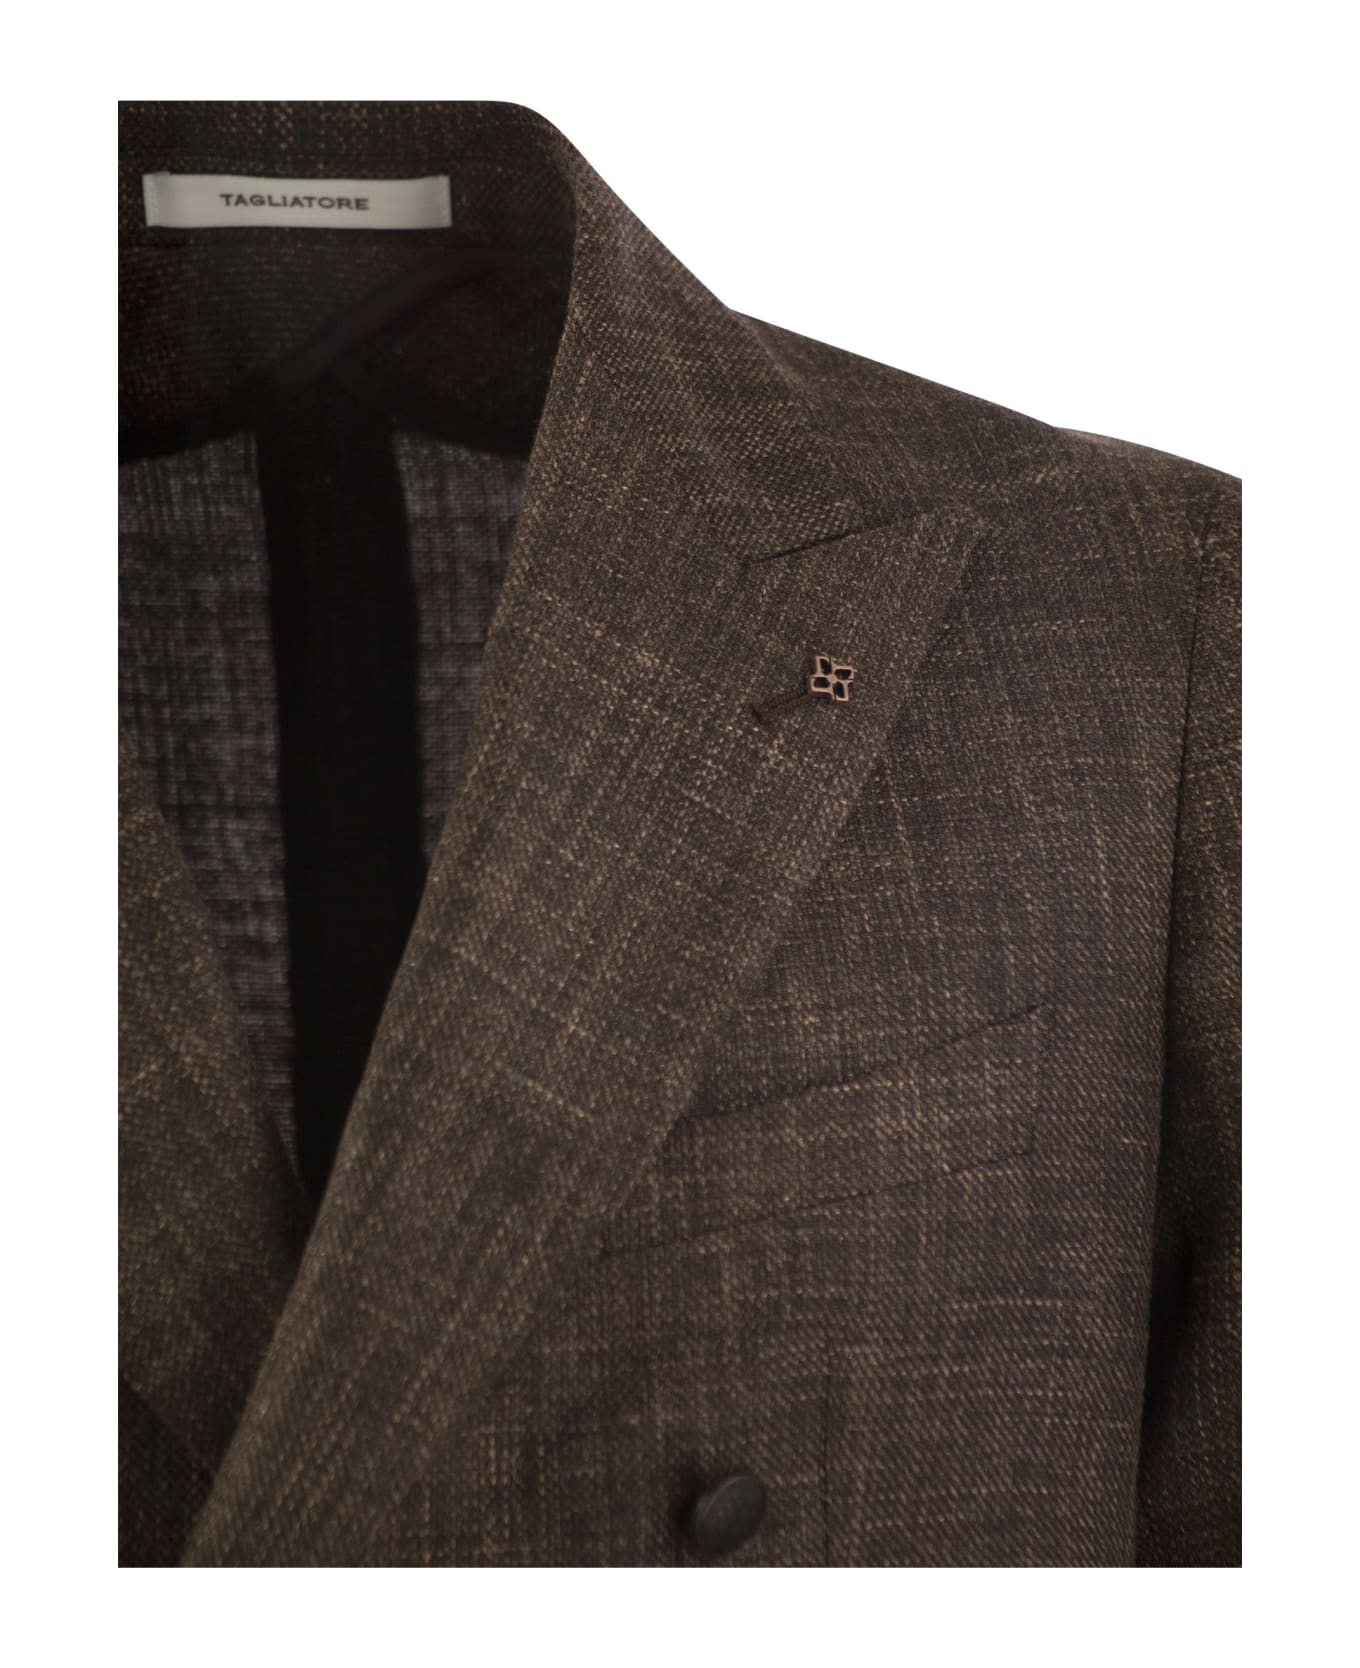 Tagliatore Double-breasted Jacket In Wool, Silk And Linen - Brown